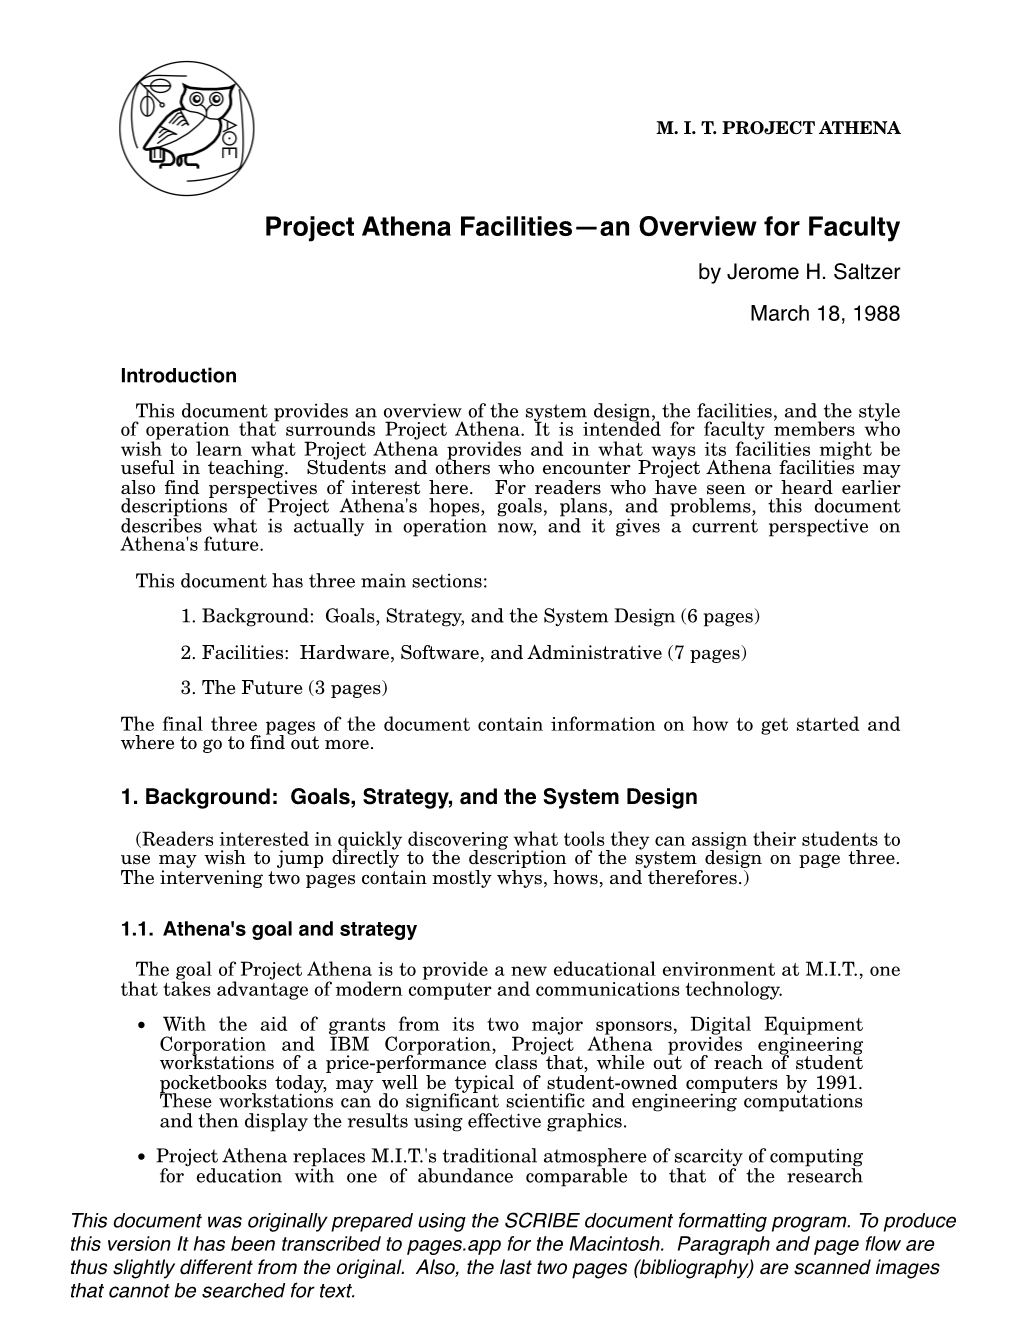 Project Athena Facilities—An Overview for Faculty by Jerome H